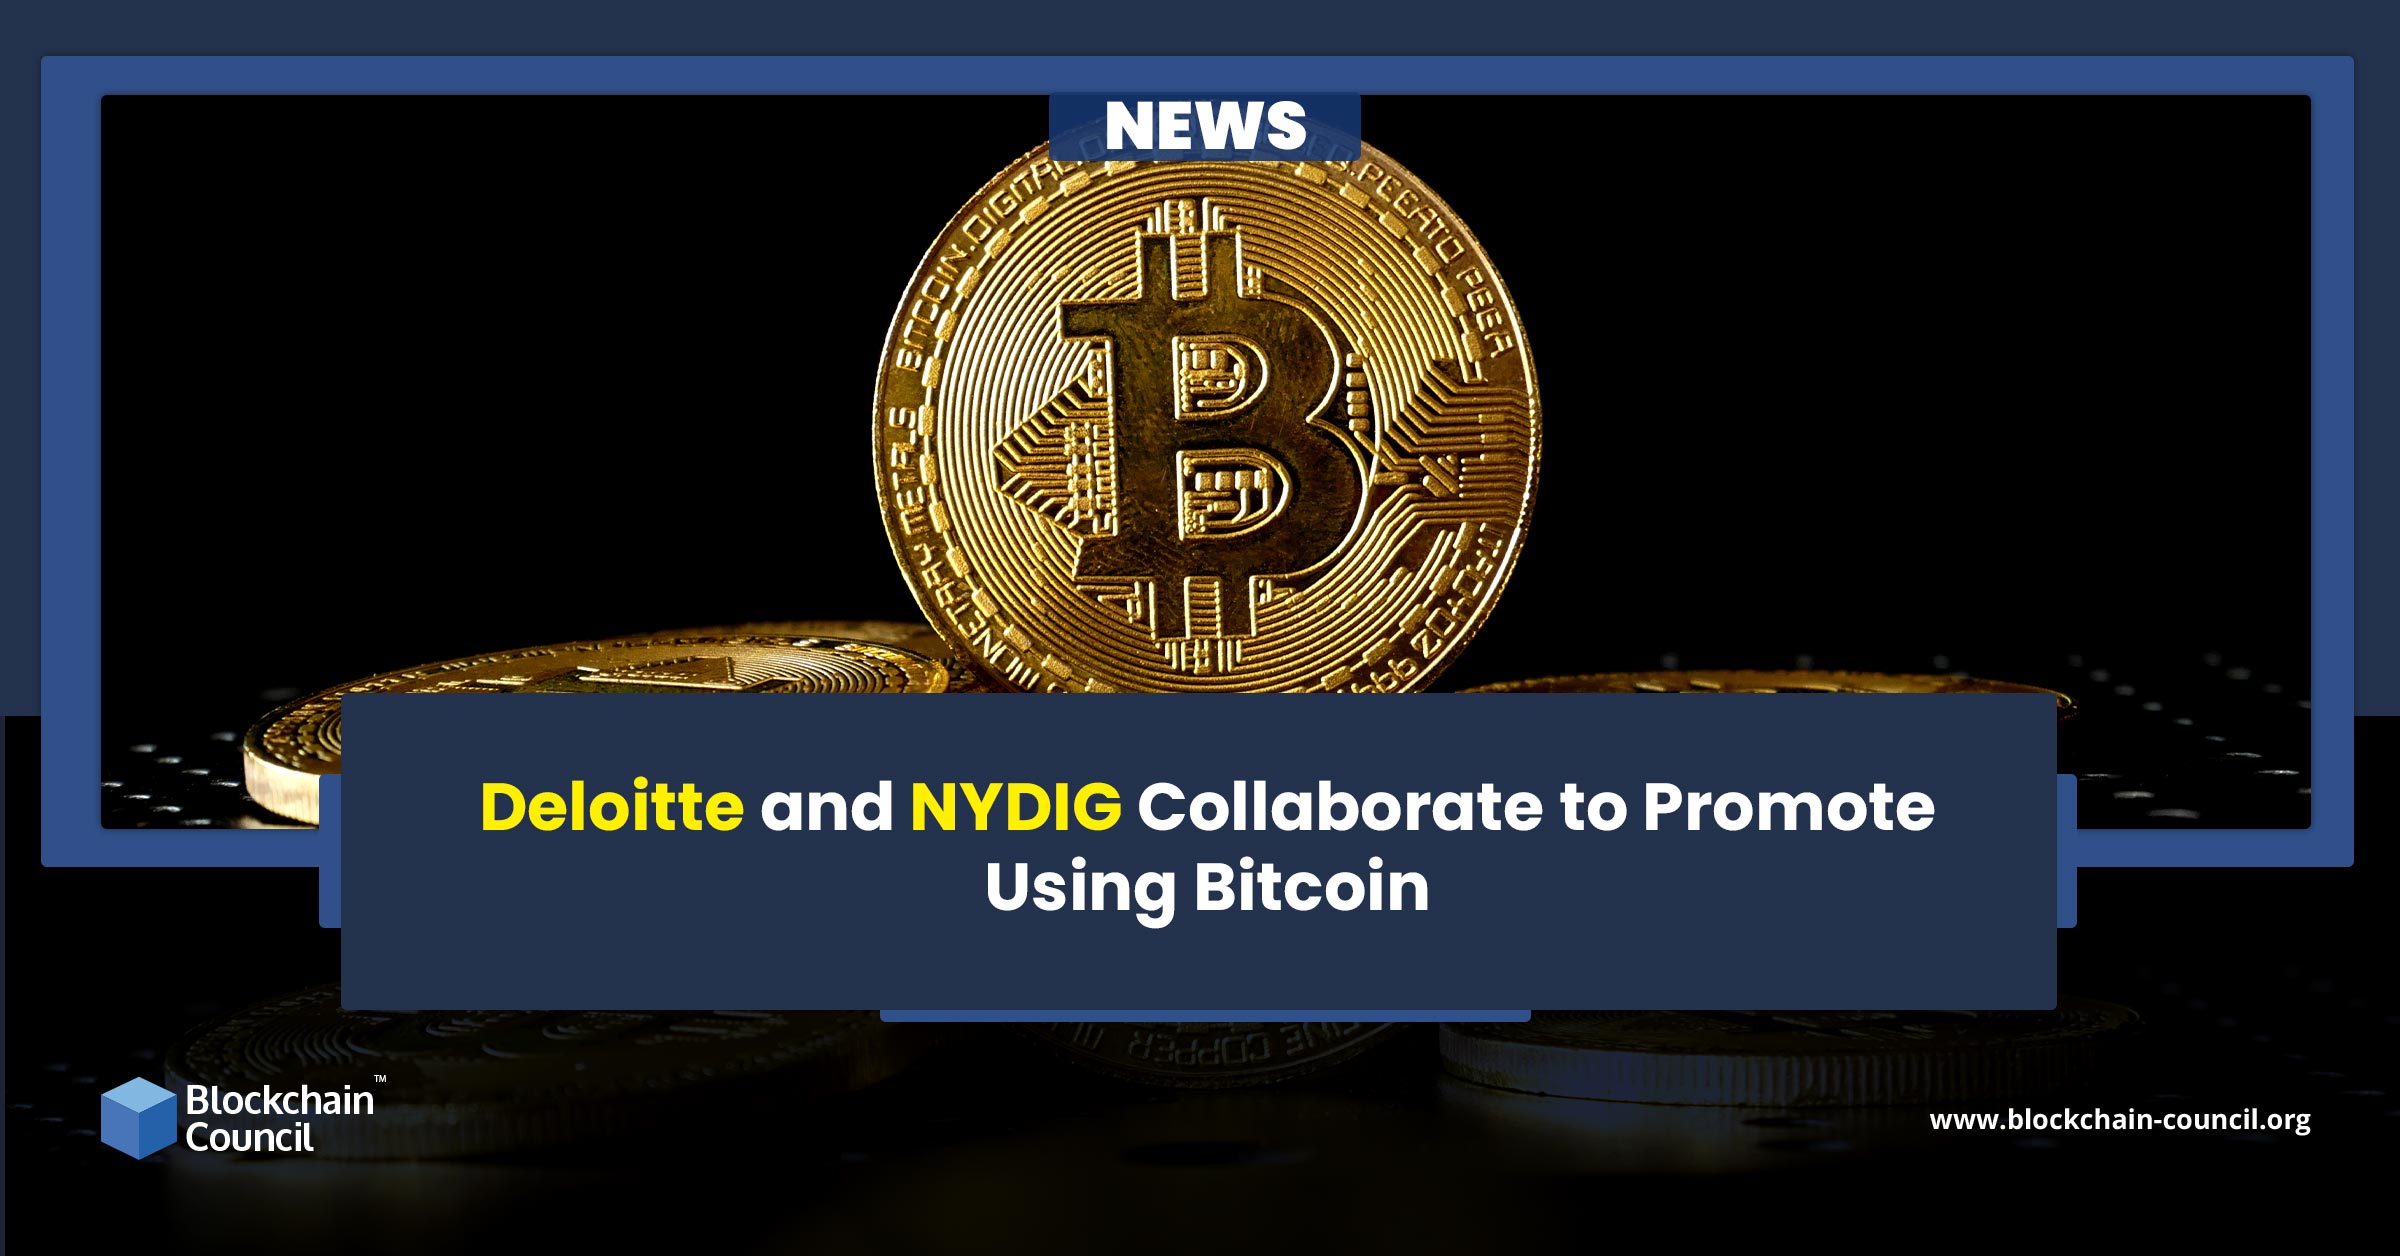 Deloitte and NYDIG Collaborate to Promote Using Bitcoin